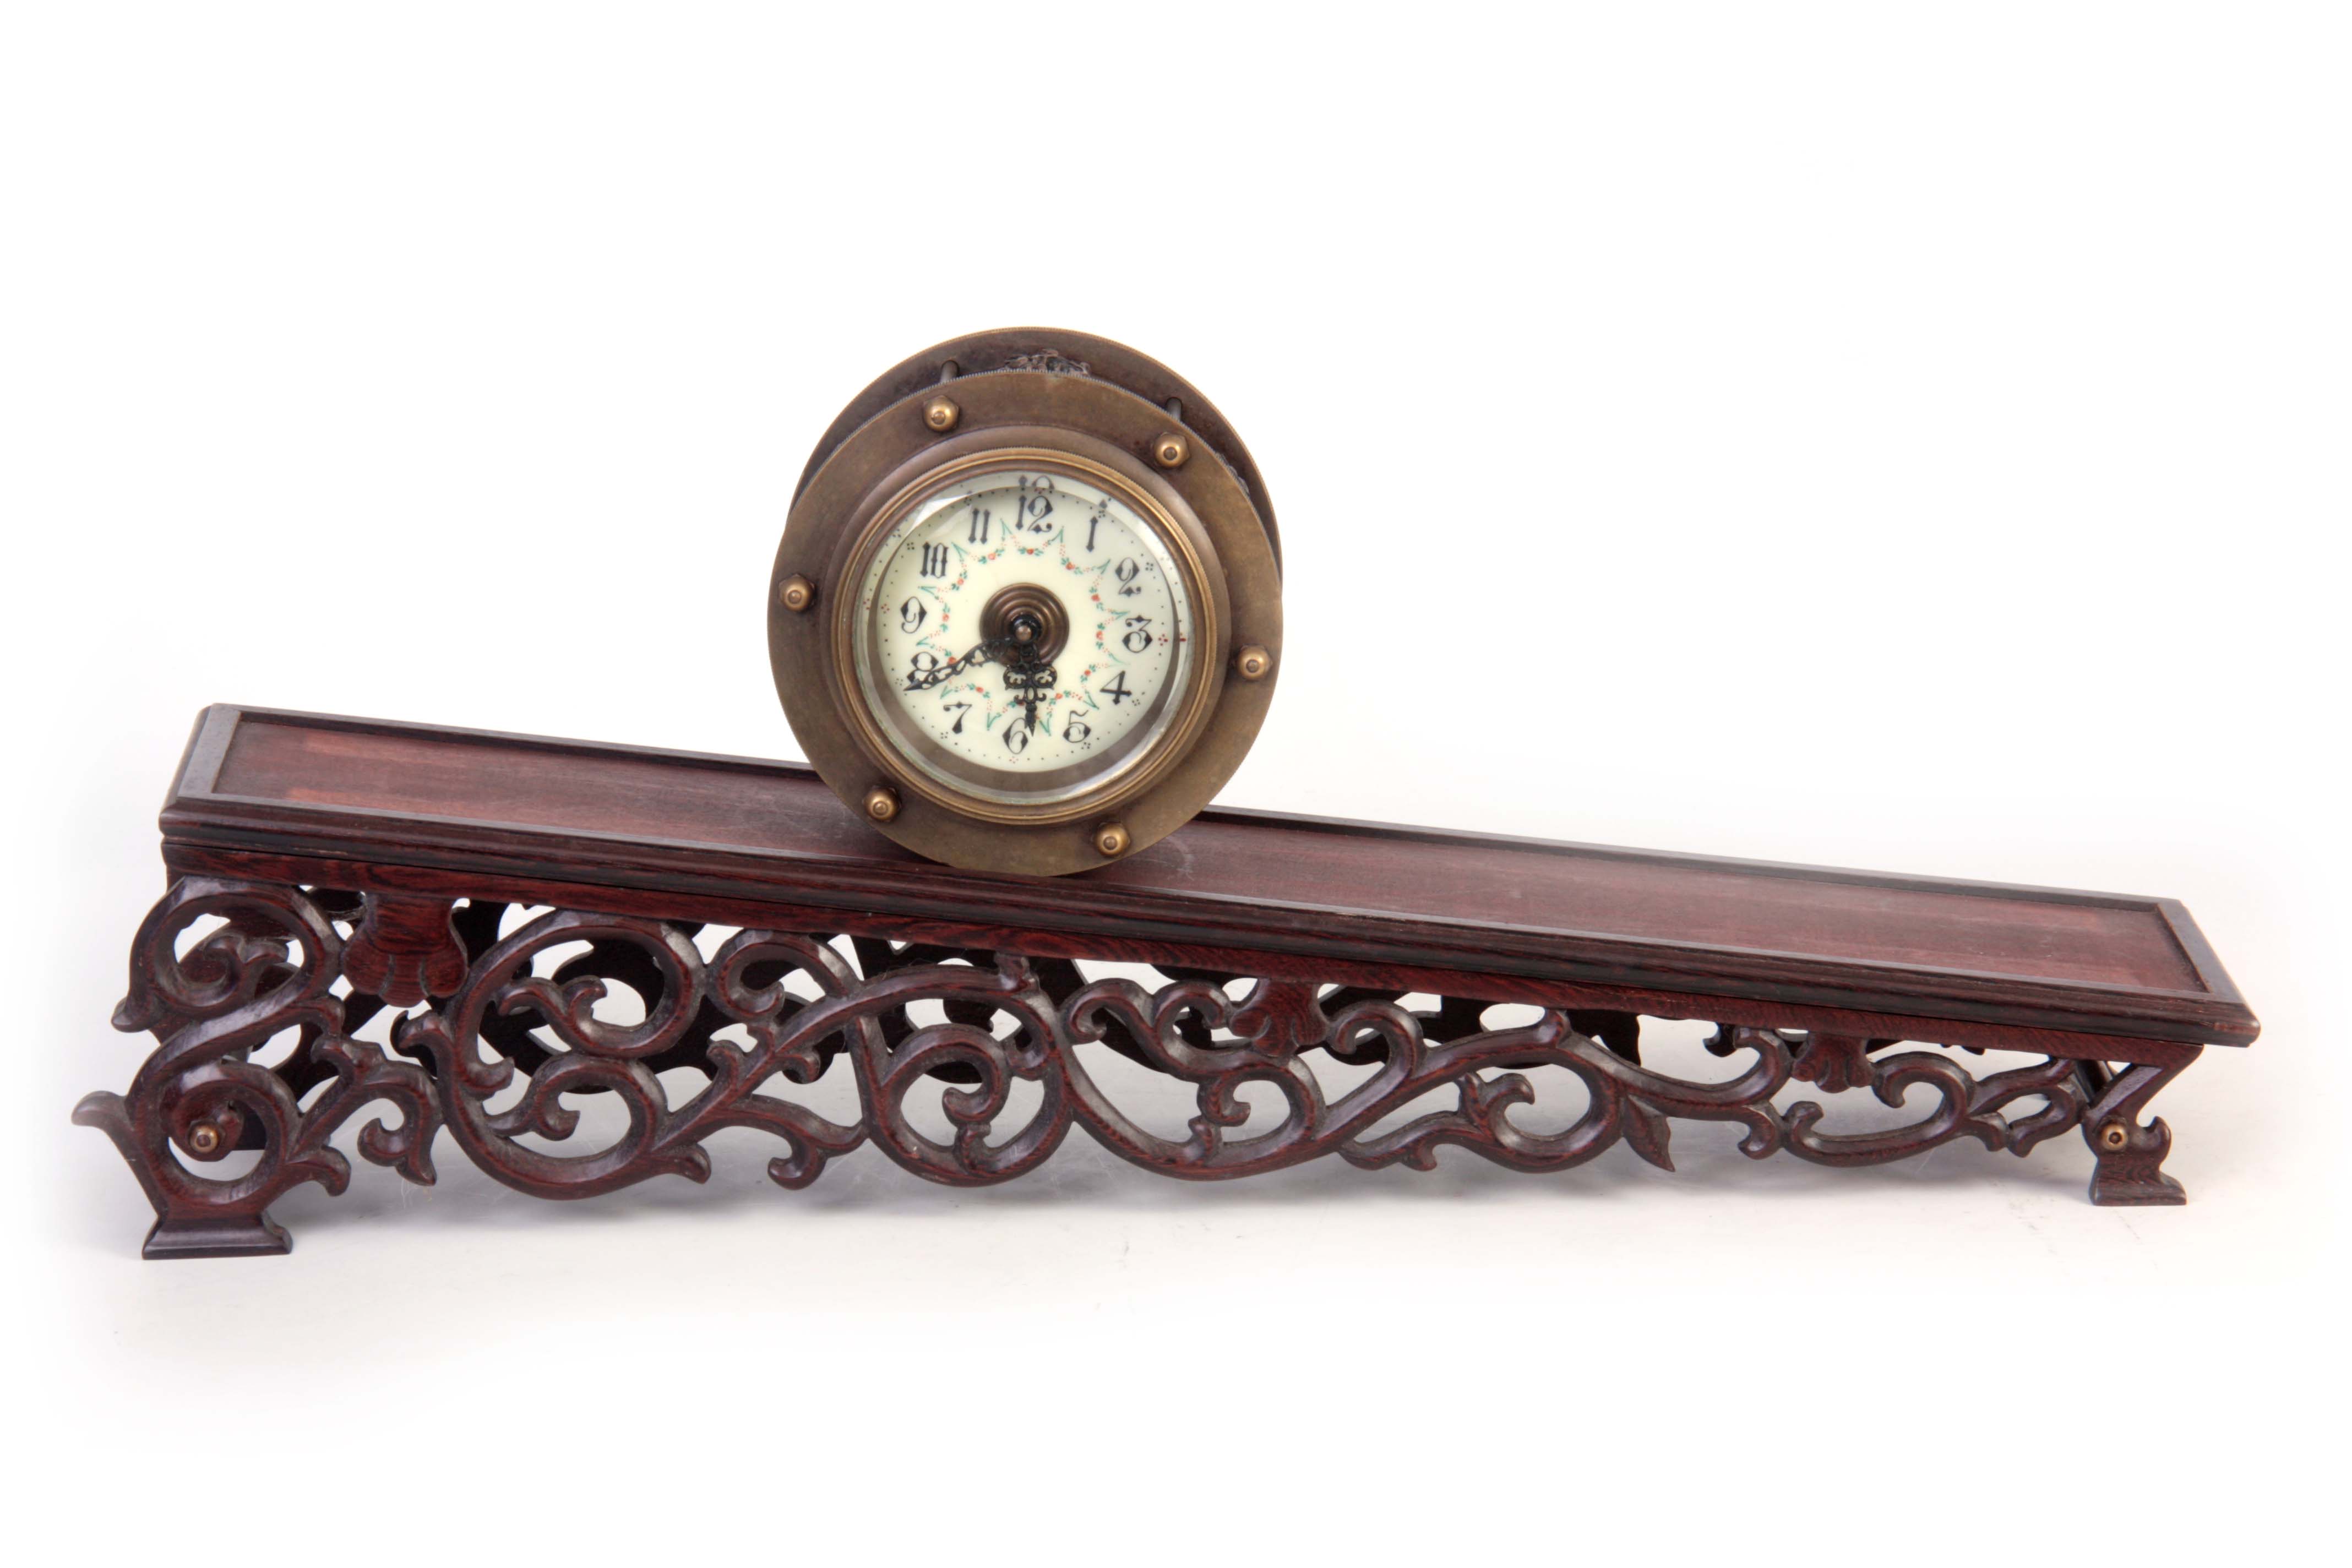 A BRASS CASED INCLINE GRAVITY CLOCK with drum-shaped case enclosing a porcelain dial with Arabic